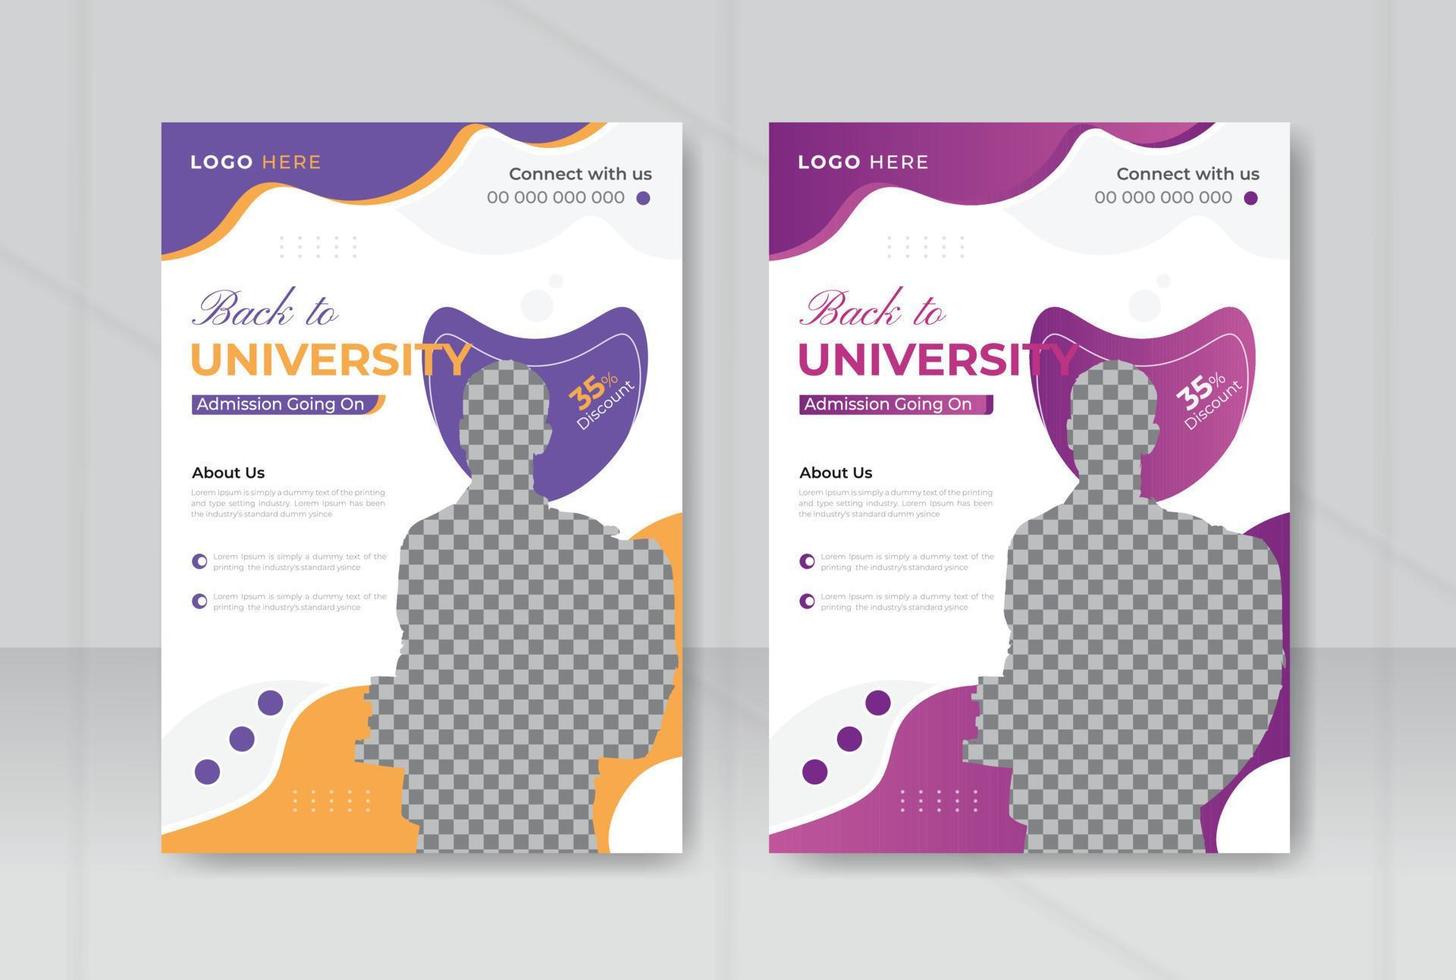 Back to University admission flyer design or promotion business flyer template, vector, a4 size ,magazine ,brochure, annual report vector